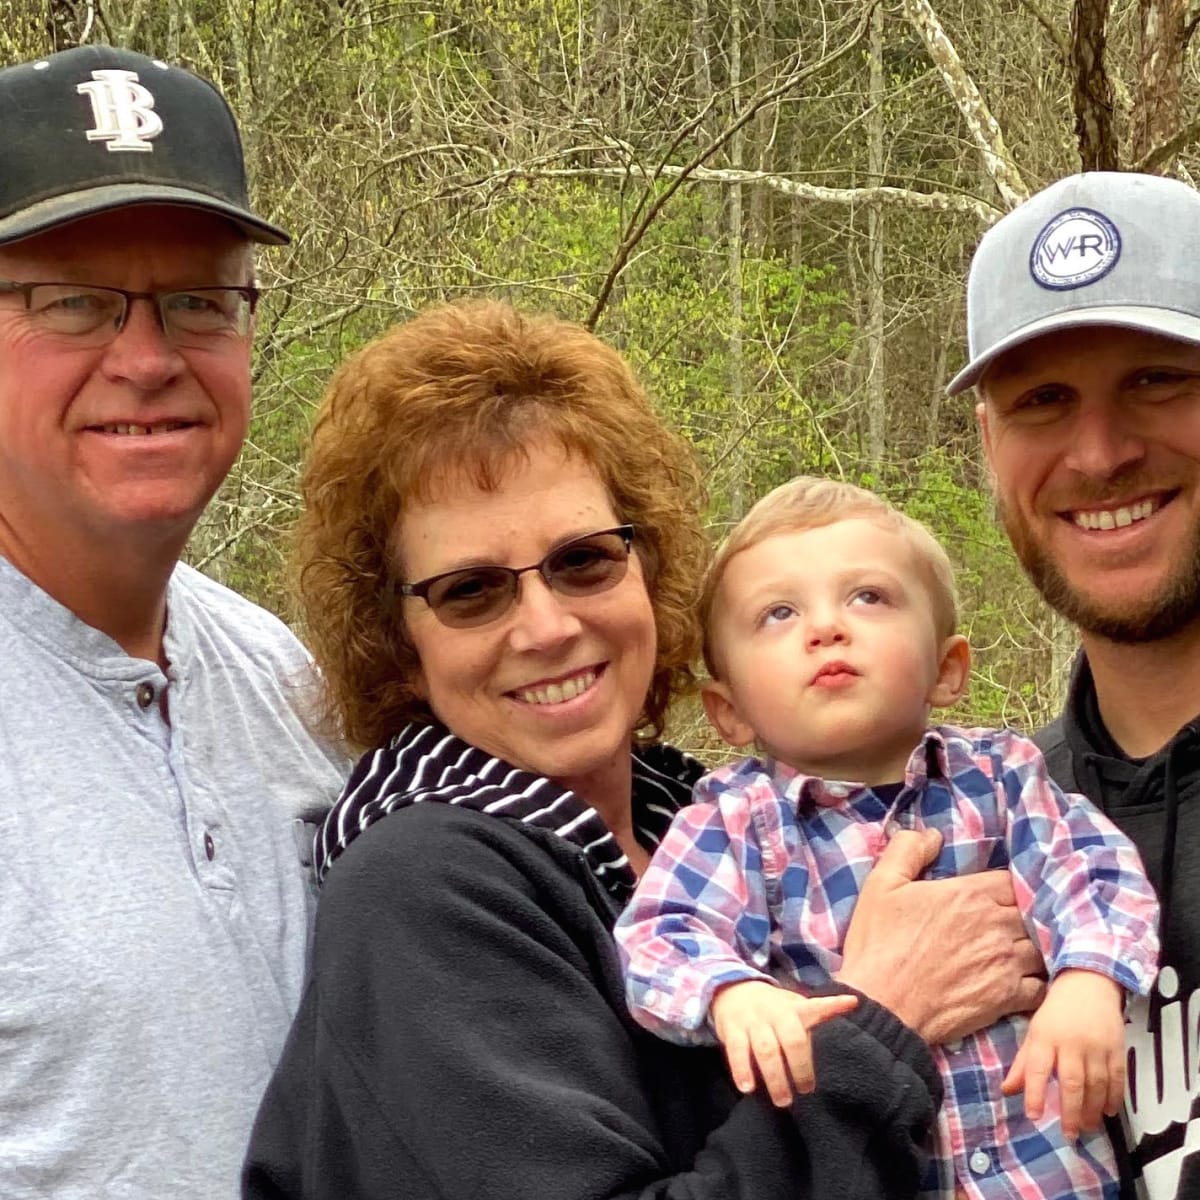 For Jeff Mercer's Father, It's Family Before Baseball Every Single Day -  Sports Illustrated Indiana Hoosiers News, Analysis and More